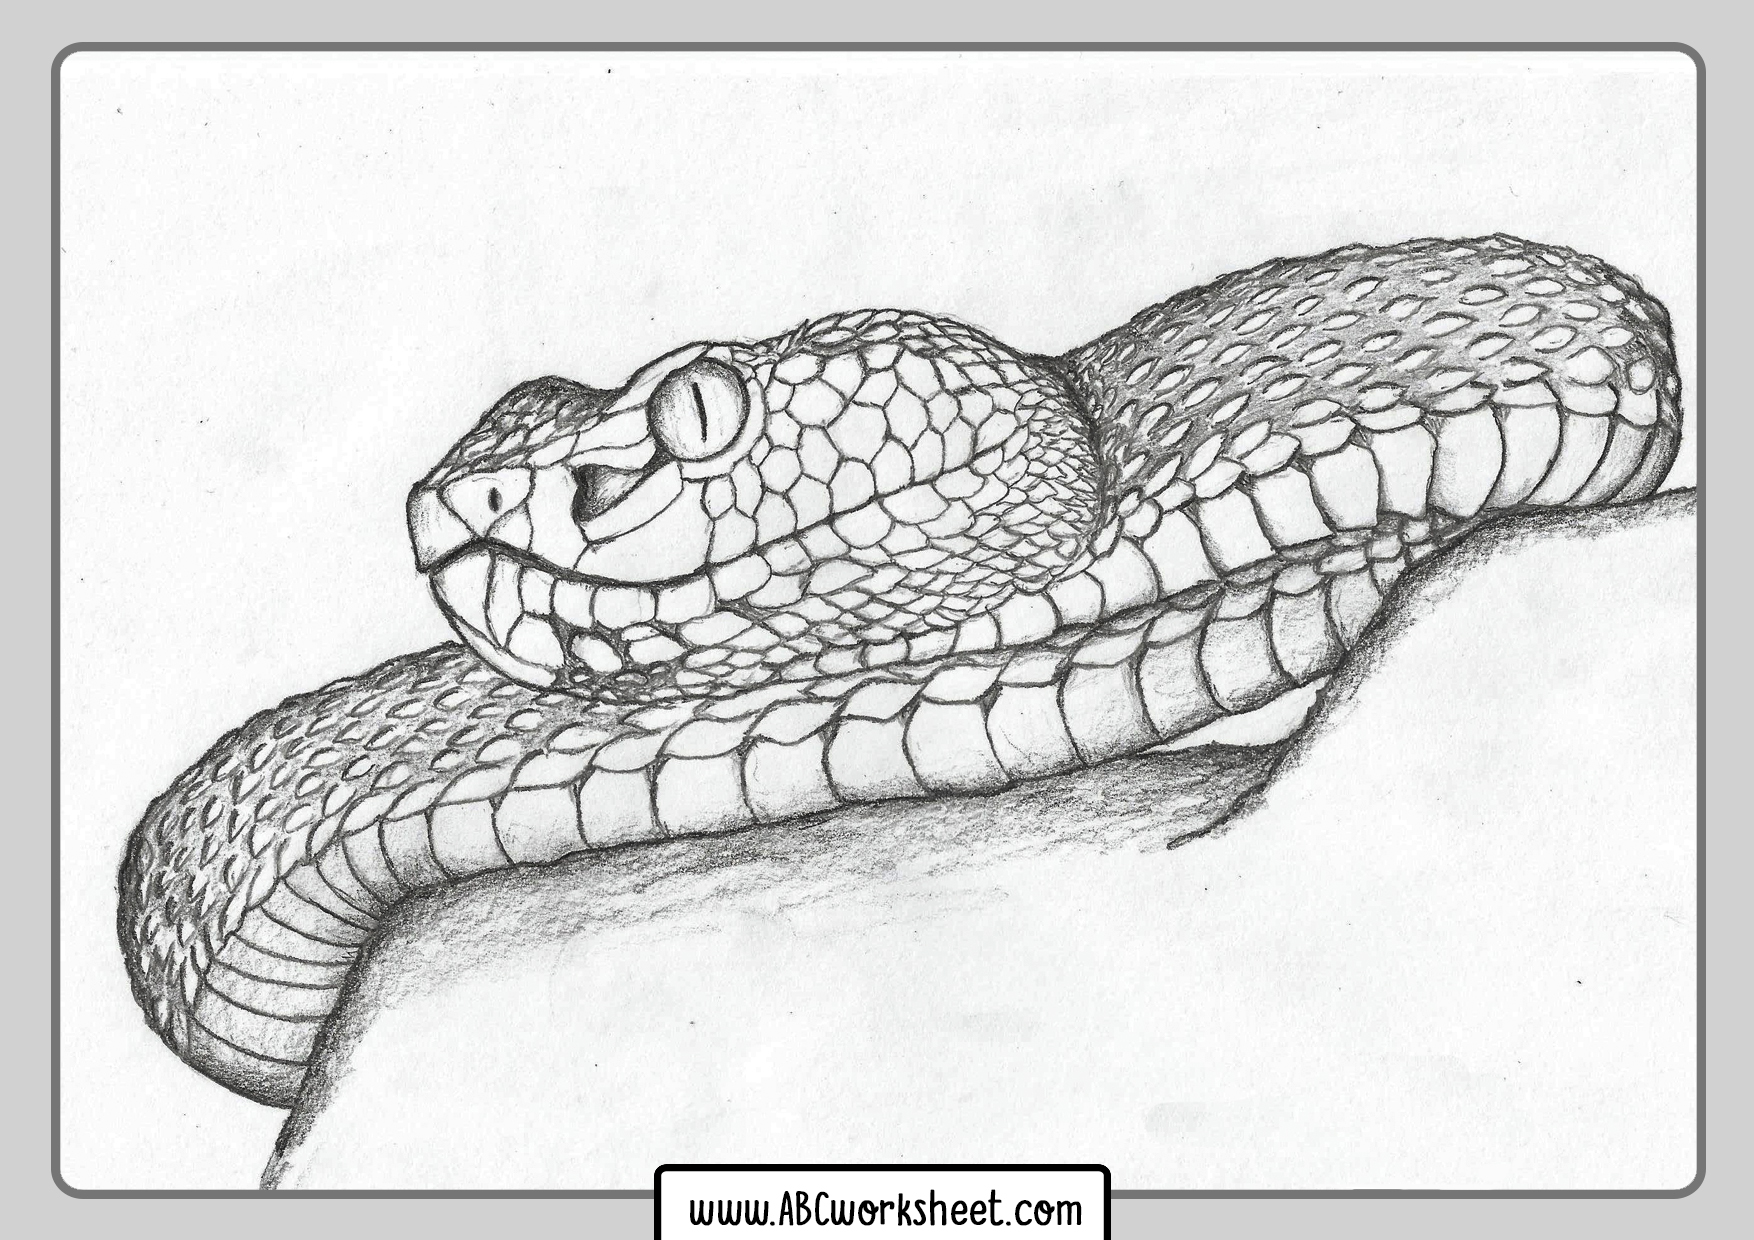 snake-drawing-for-kids-wallpapers-gallery